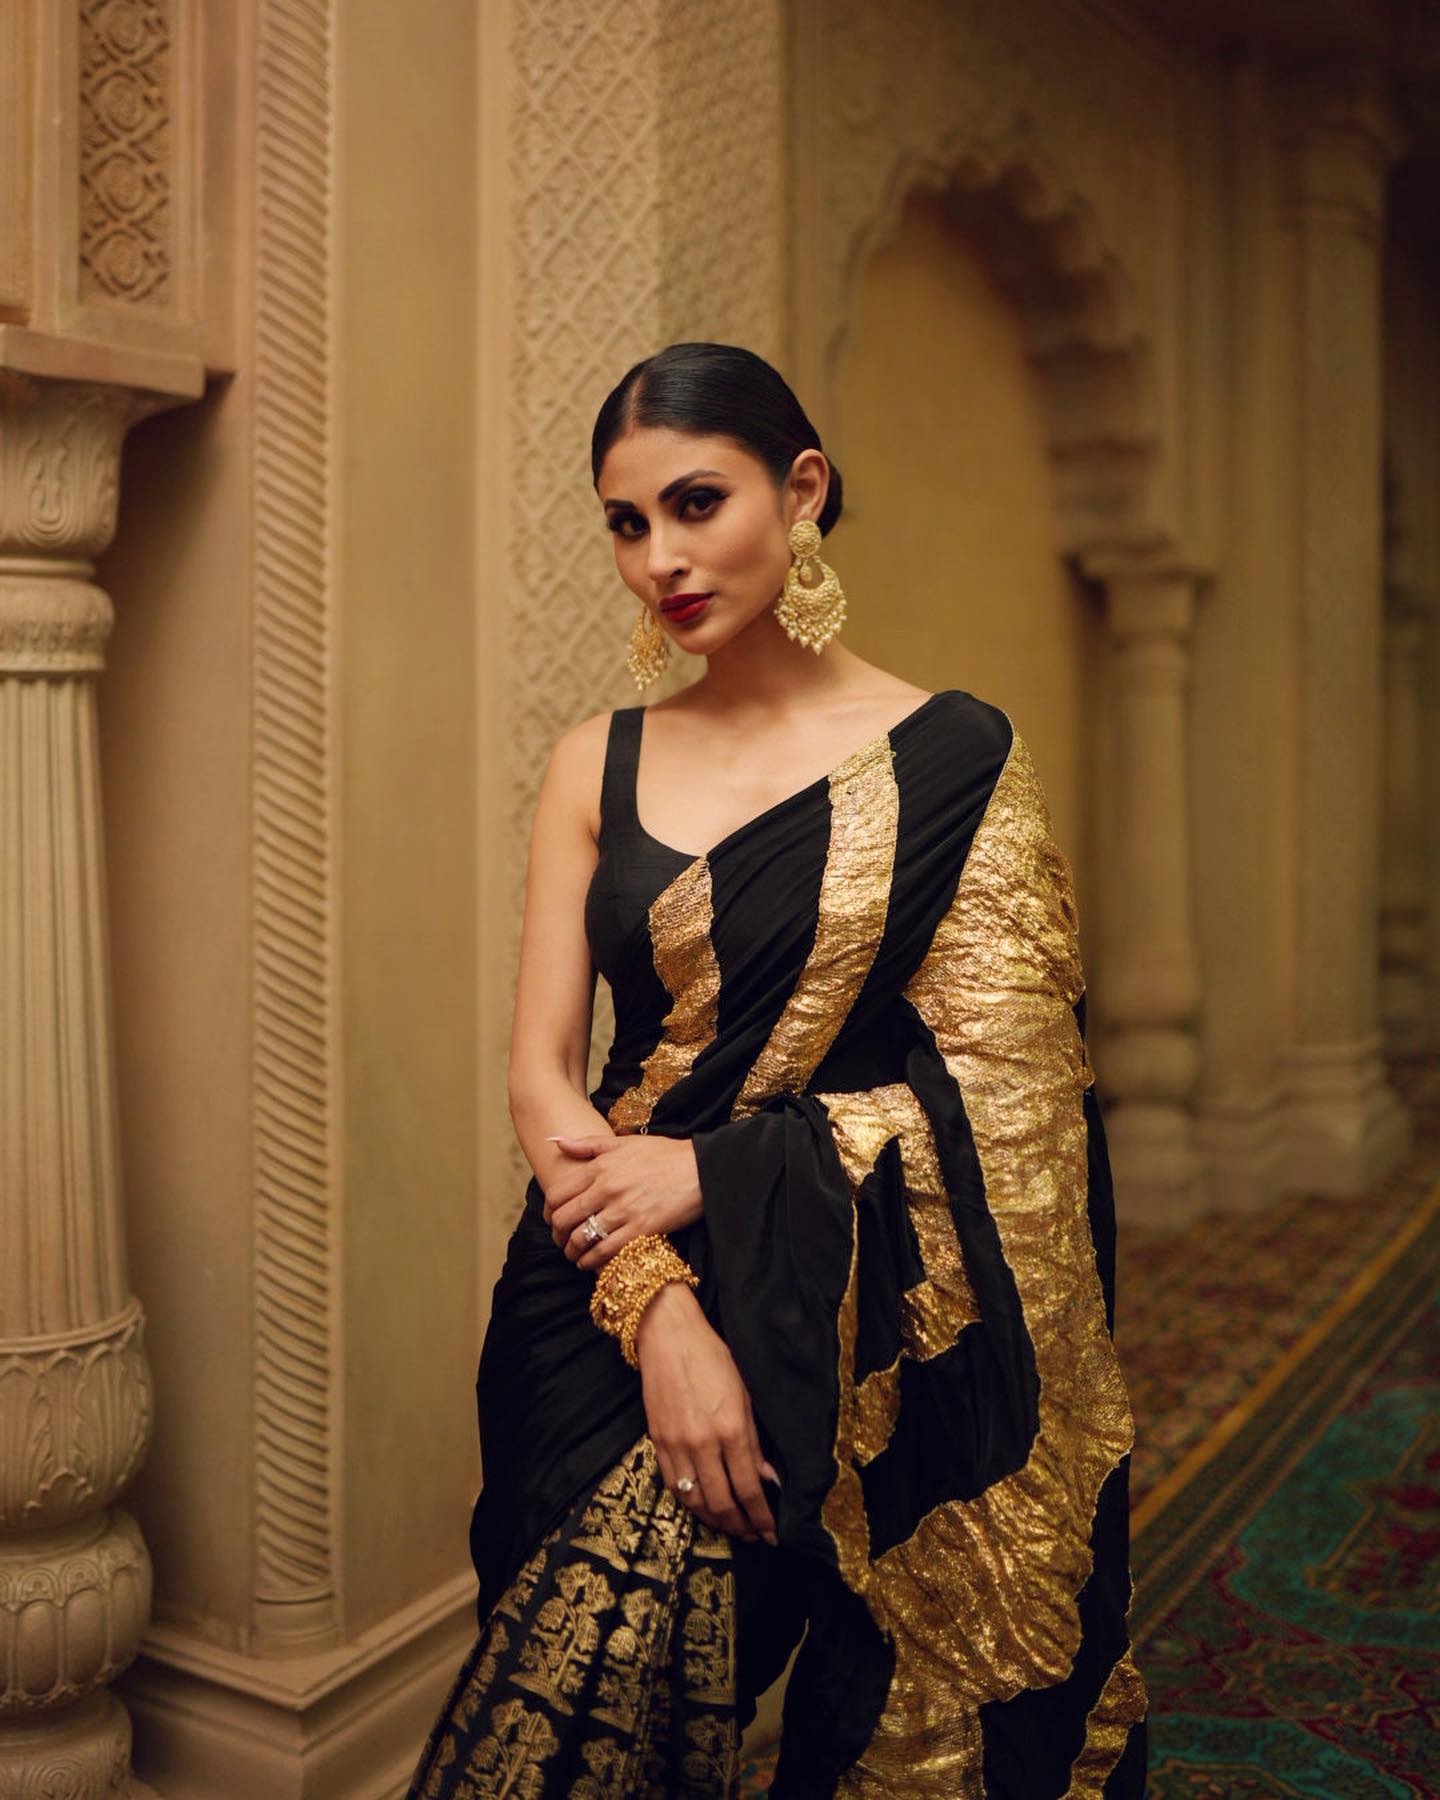 7 Bridesmaid Outfit Ideas To Steal From Mouni Roy's Closet